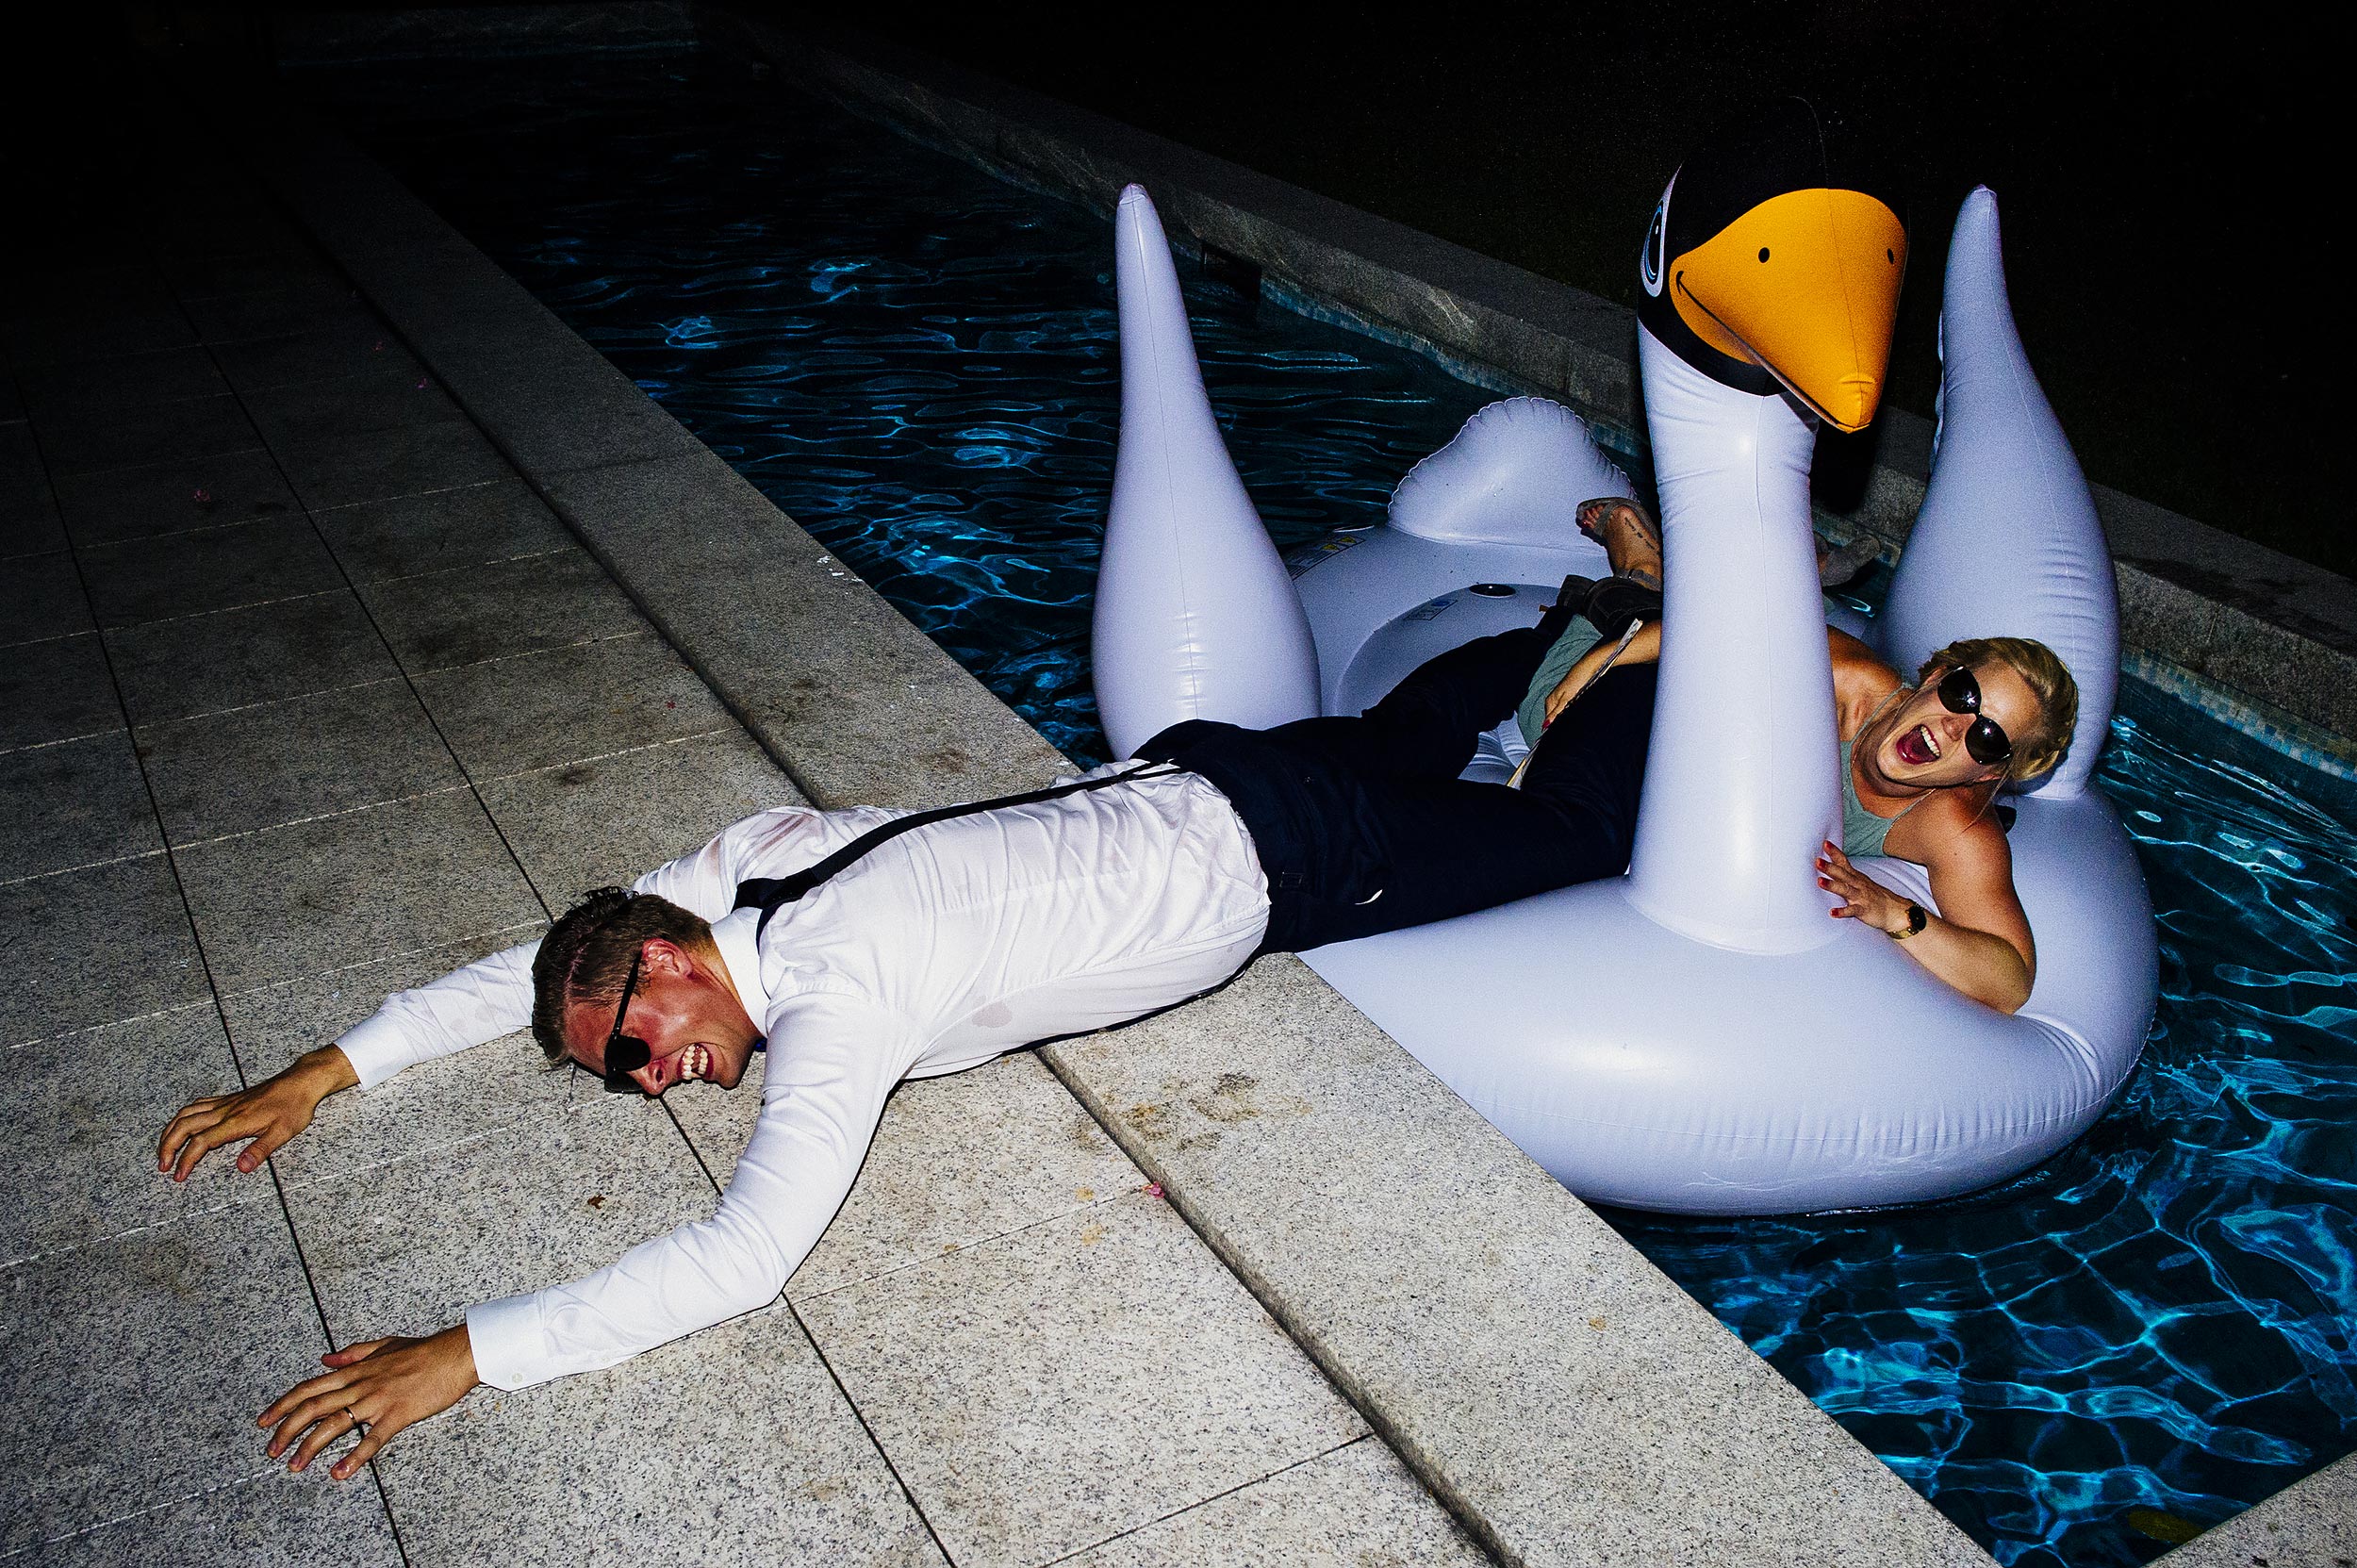 crazy-pool-party-wedding-inflatable-duck-in-lake-como-by-Alessandro-Avenali-italian-photographer.jpg